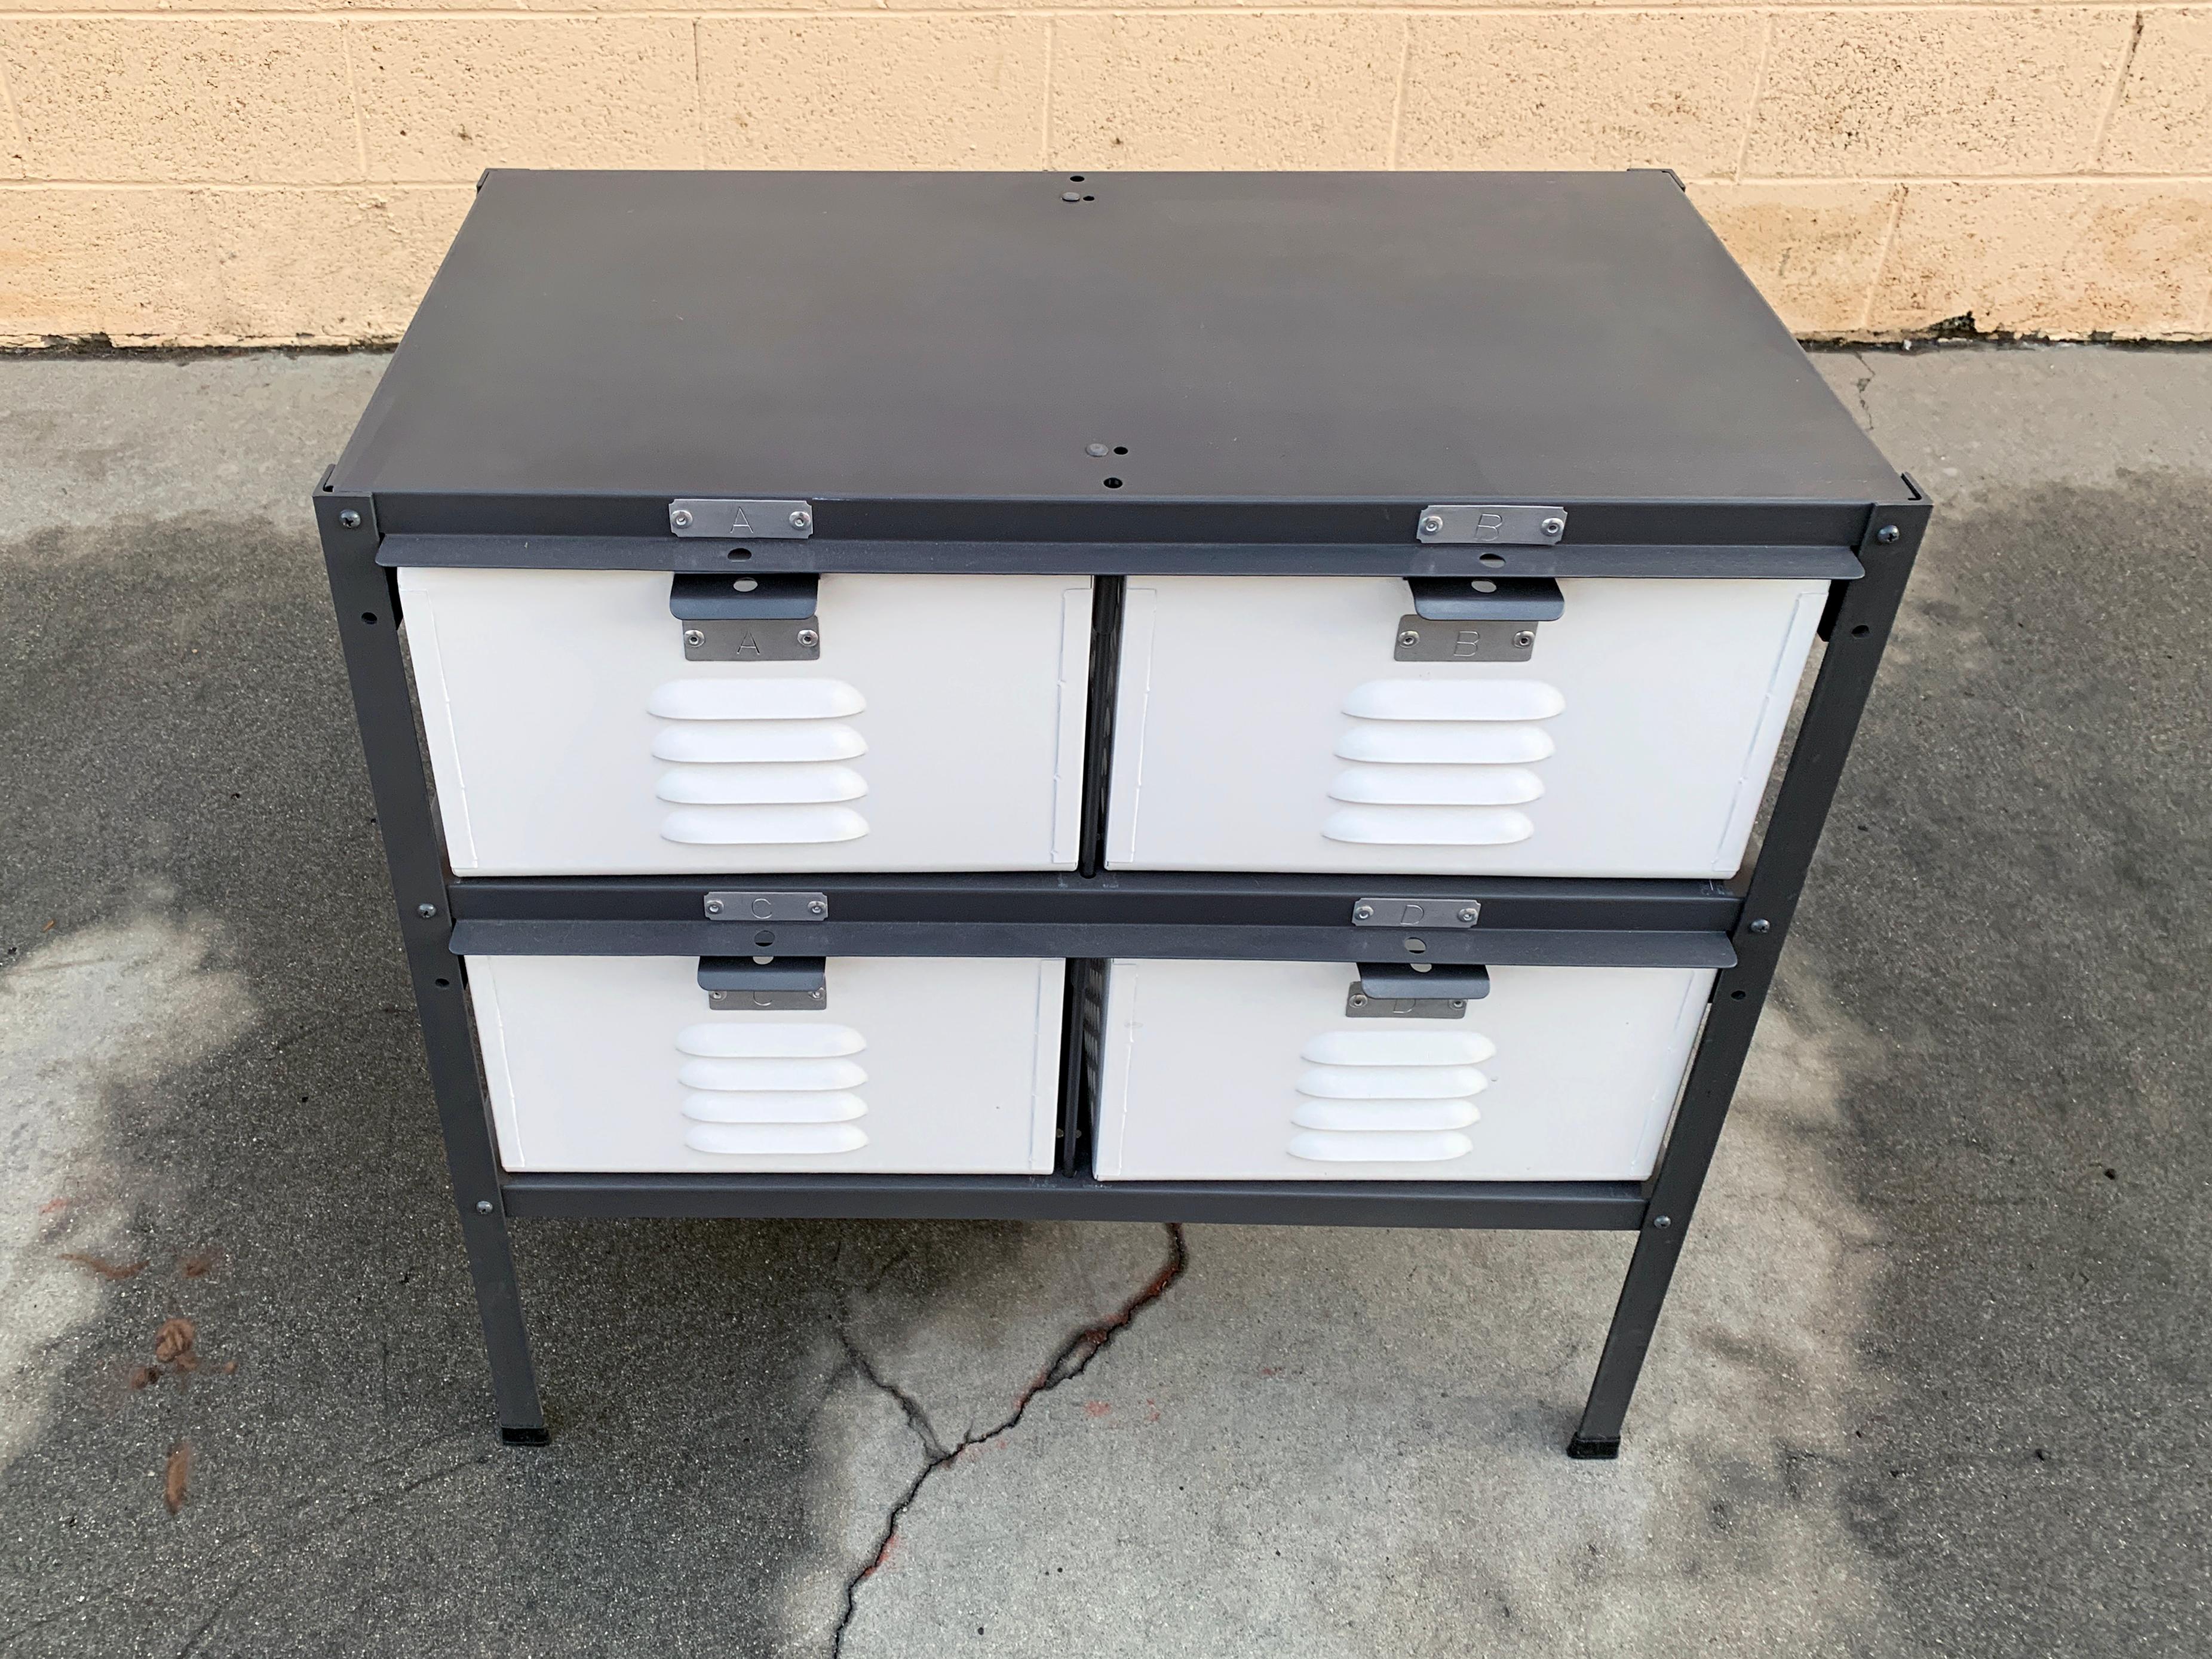 Our all new, custom fabricated 2 wide x 2 high locker basket unit is inspired by those of the 1950s and 1960s. Made to order in a range of fun colors and practical configurations. As pictured powder coated color include: WHITE (WH12) baskets in a